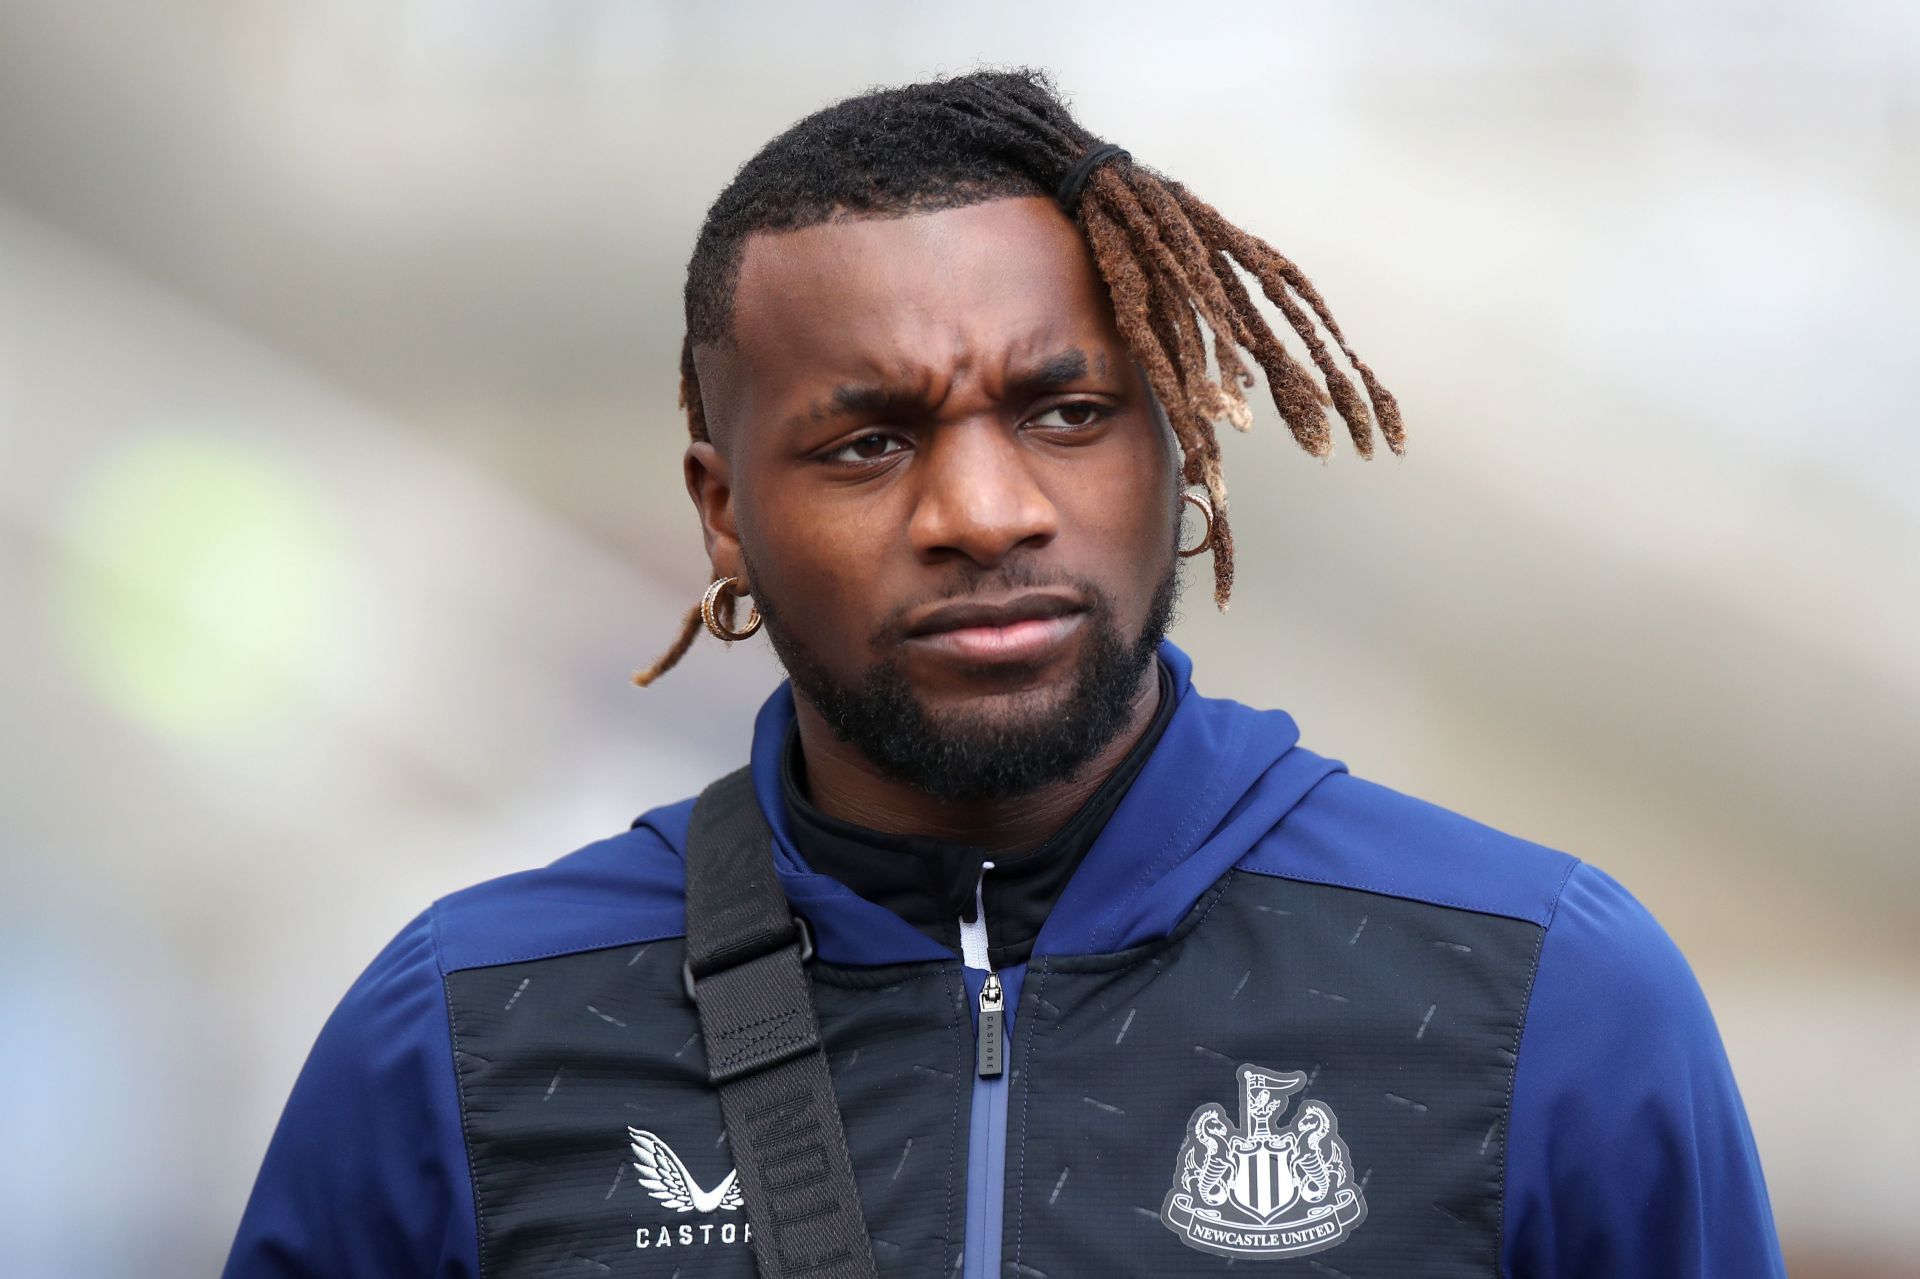 The attacker was guilty of giving the ball away, leading to Everton scoring their winning goal versus Newcastle in the Premier League on Thursday.